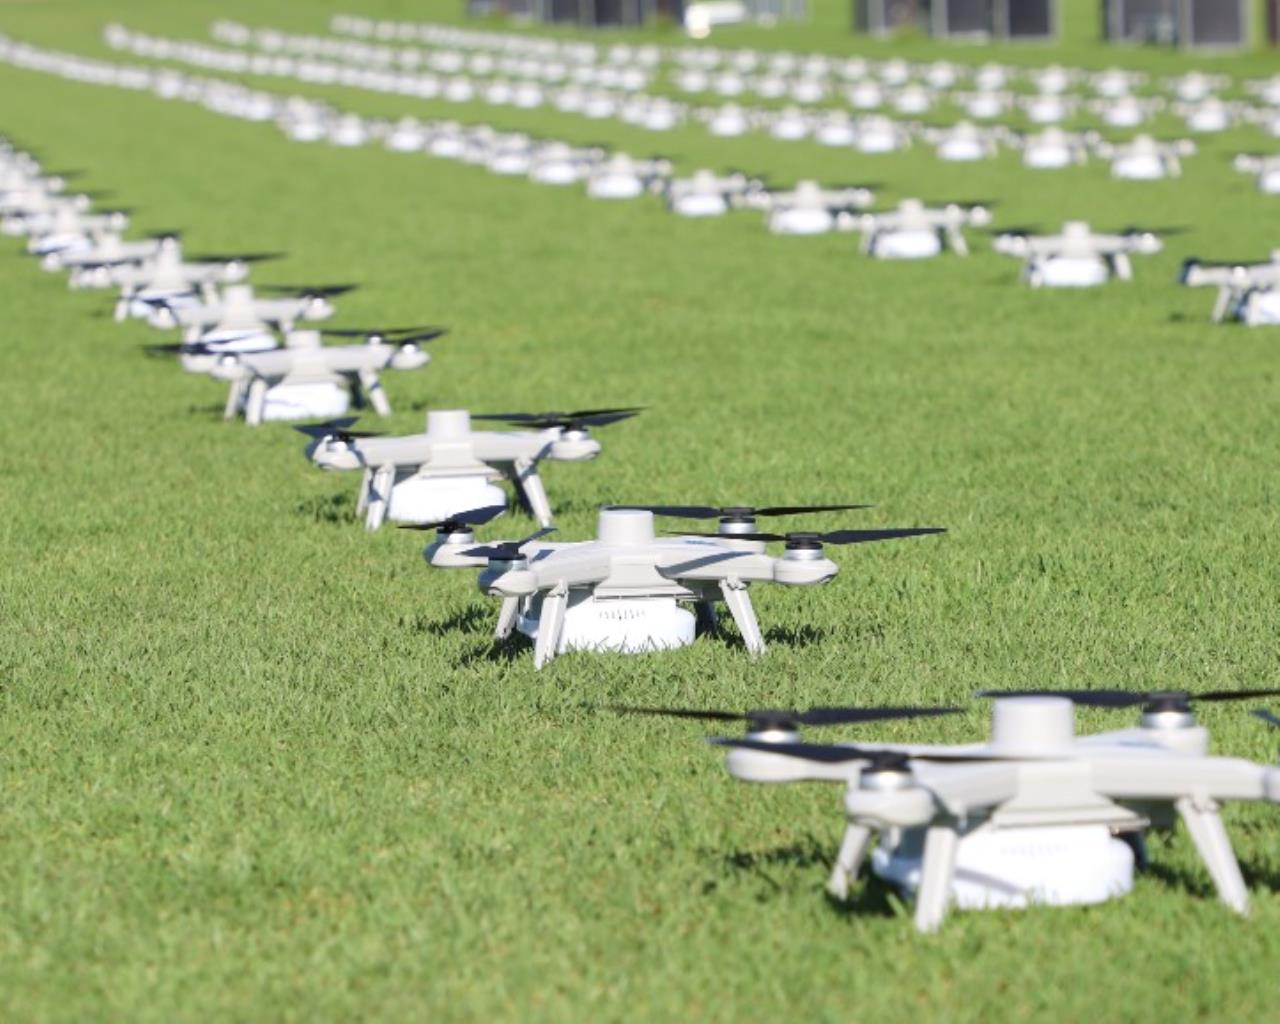 300 drones on grass 